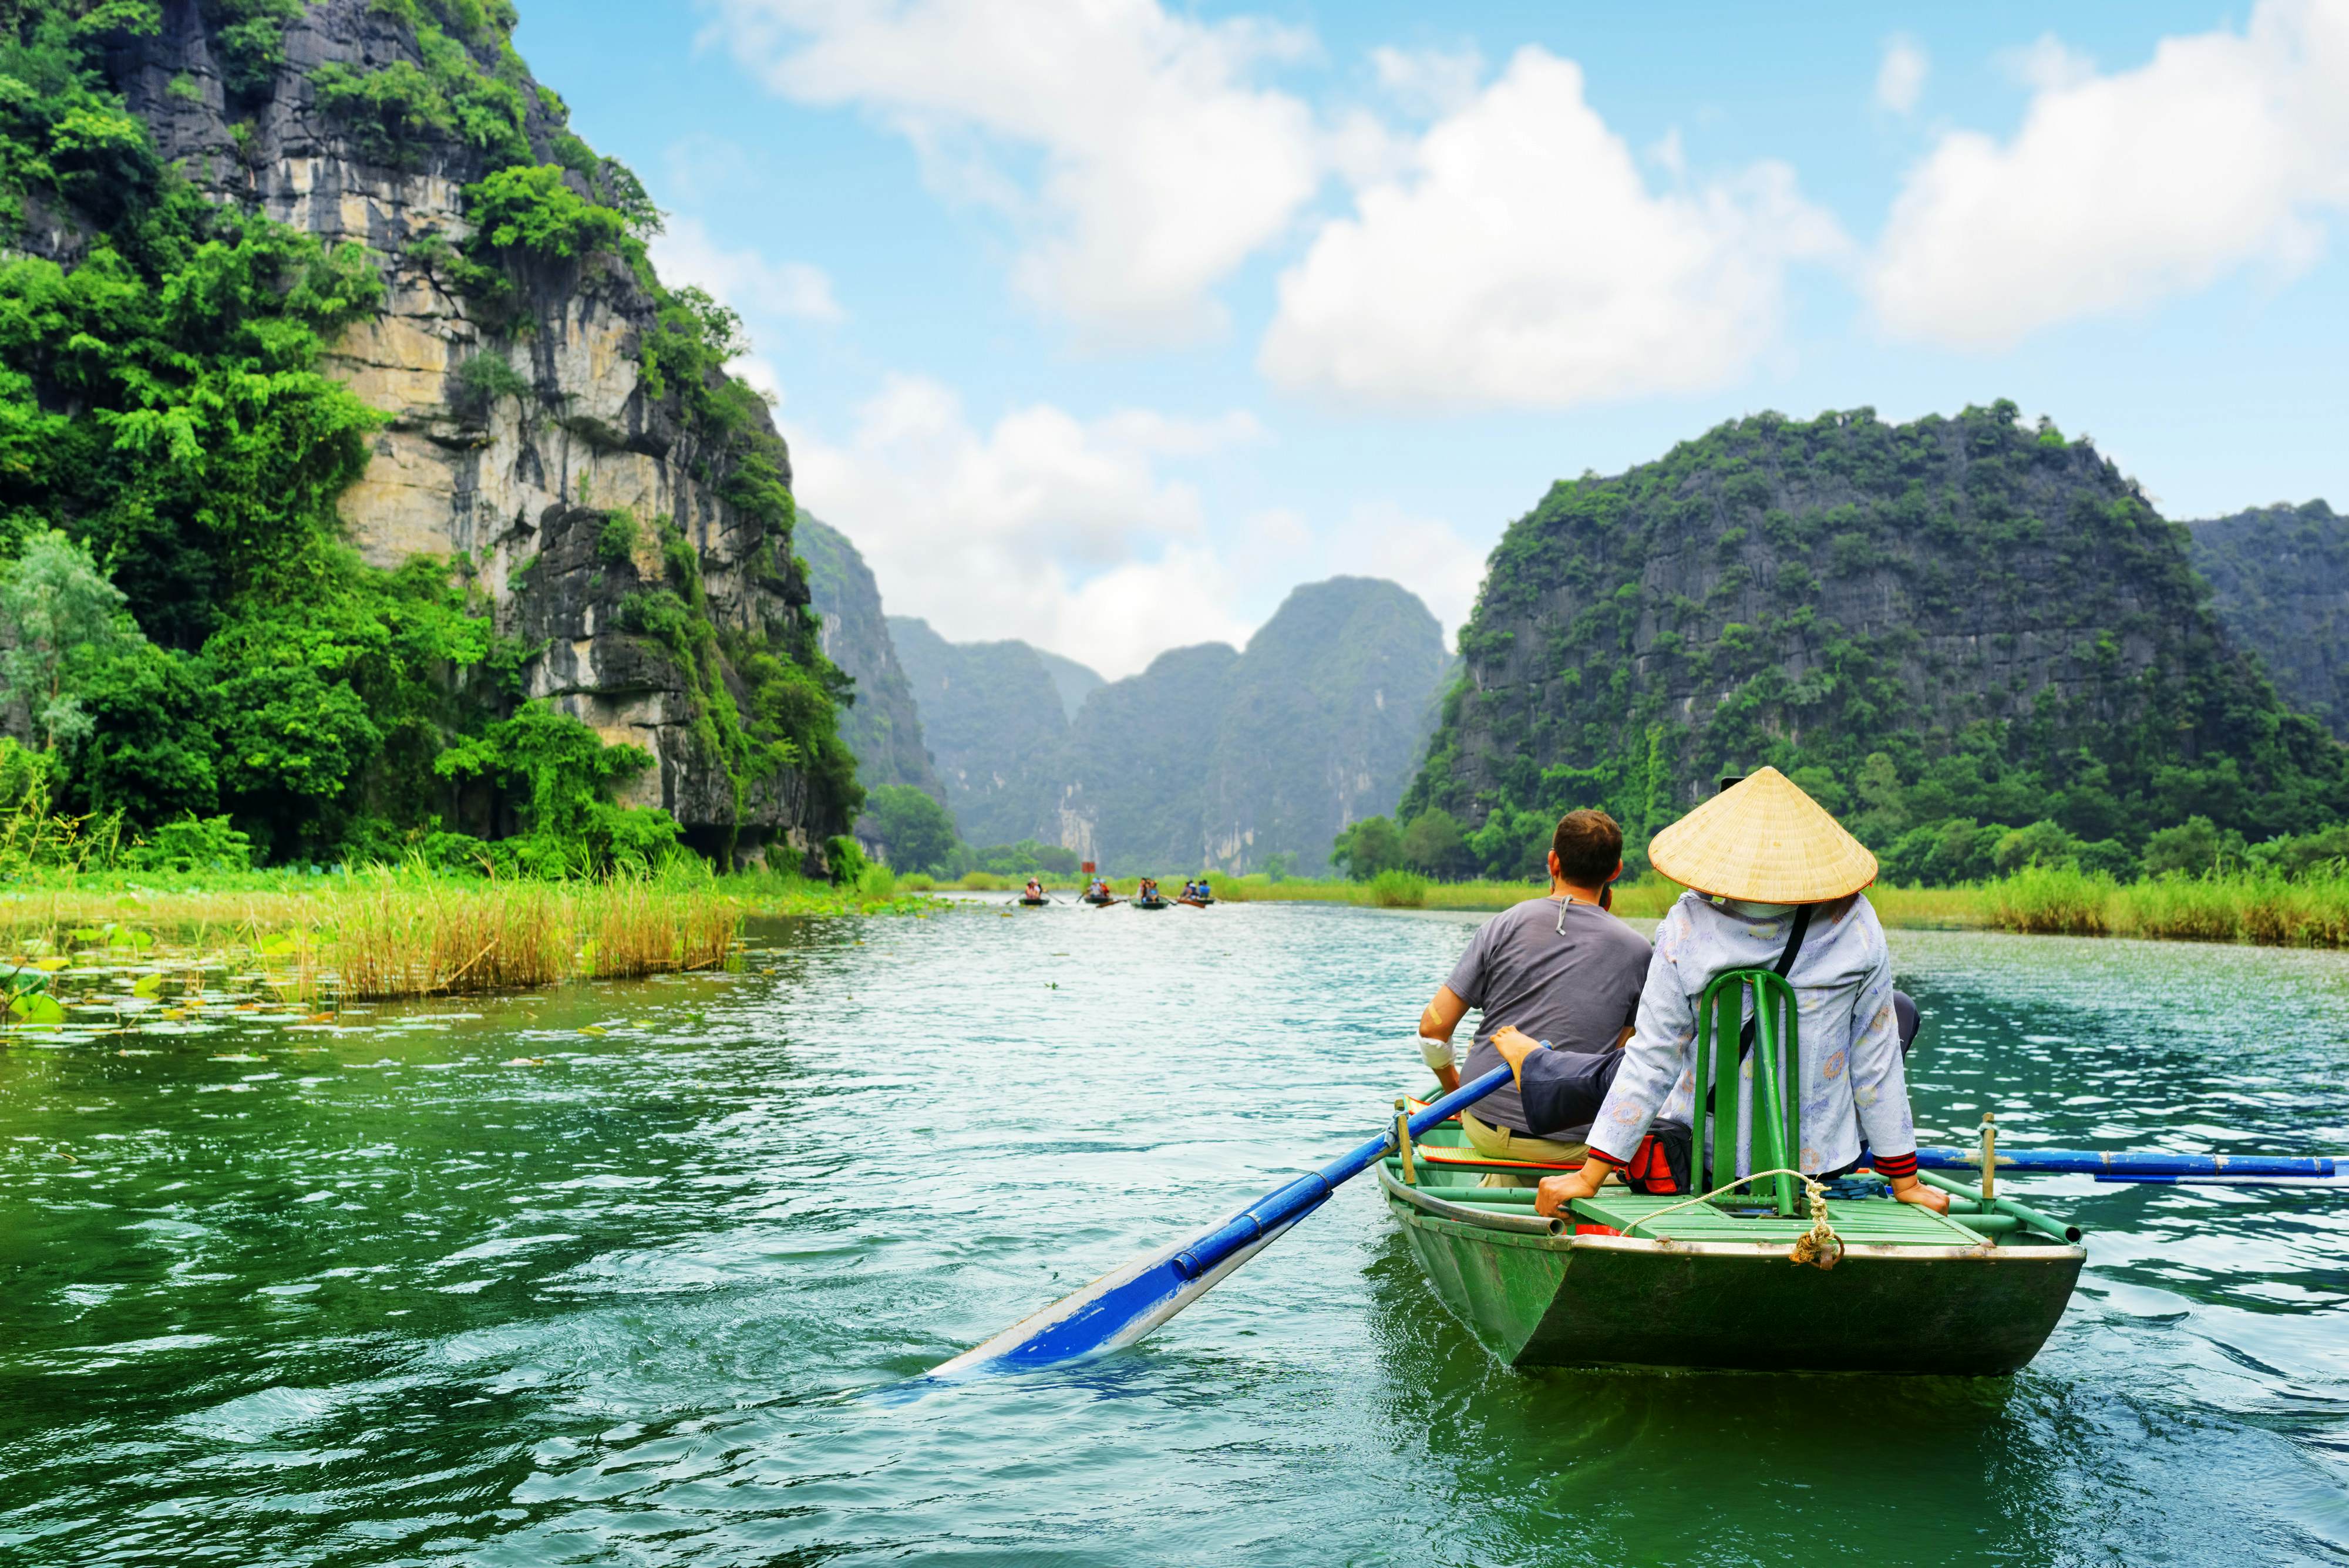 Vietnam Travel Insurance - Required Visitors Coverage